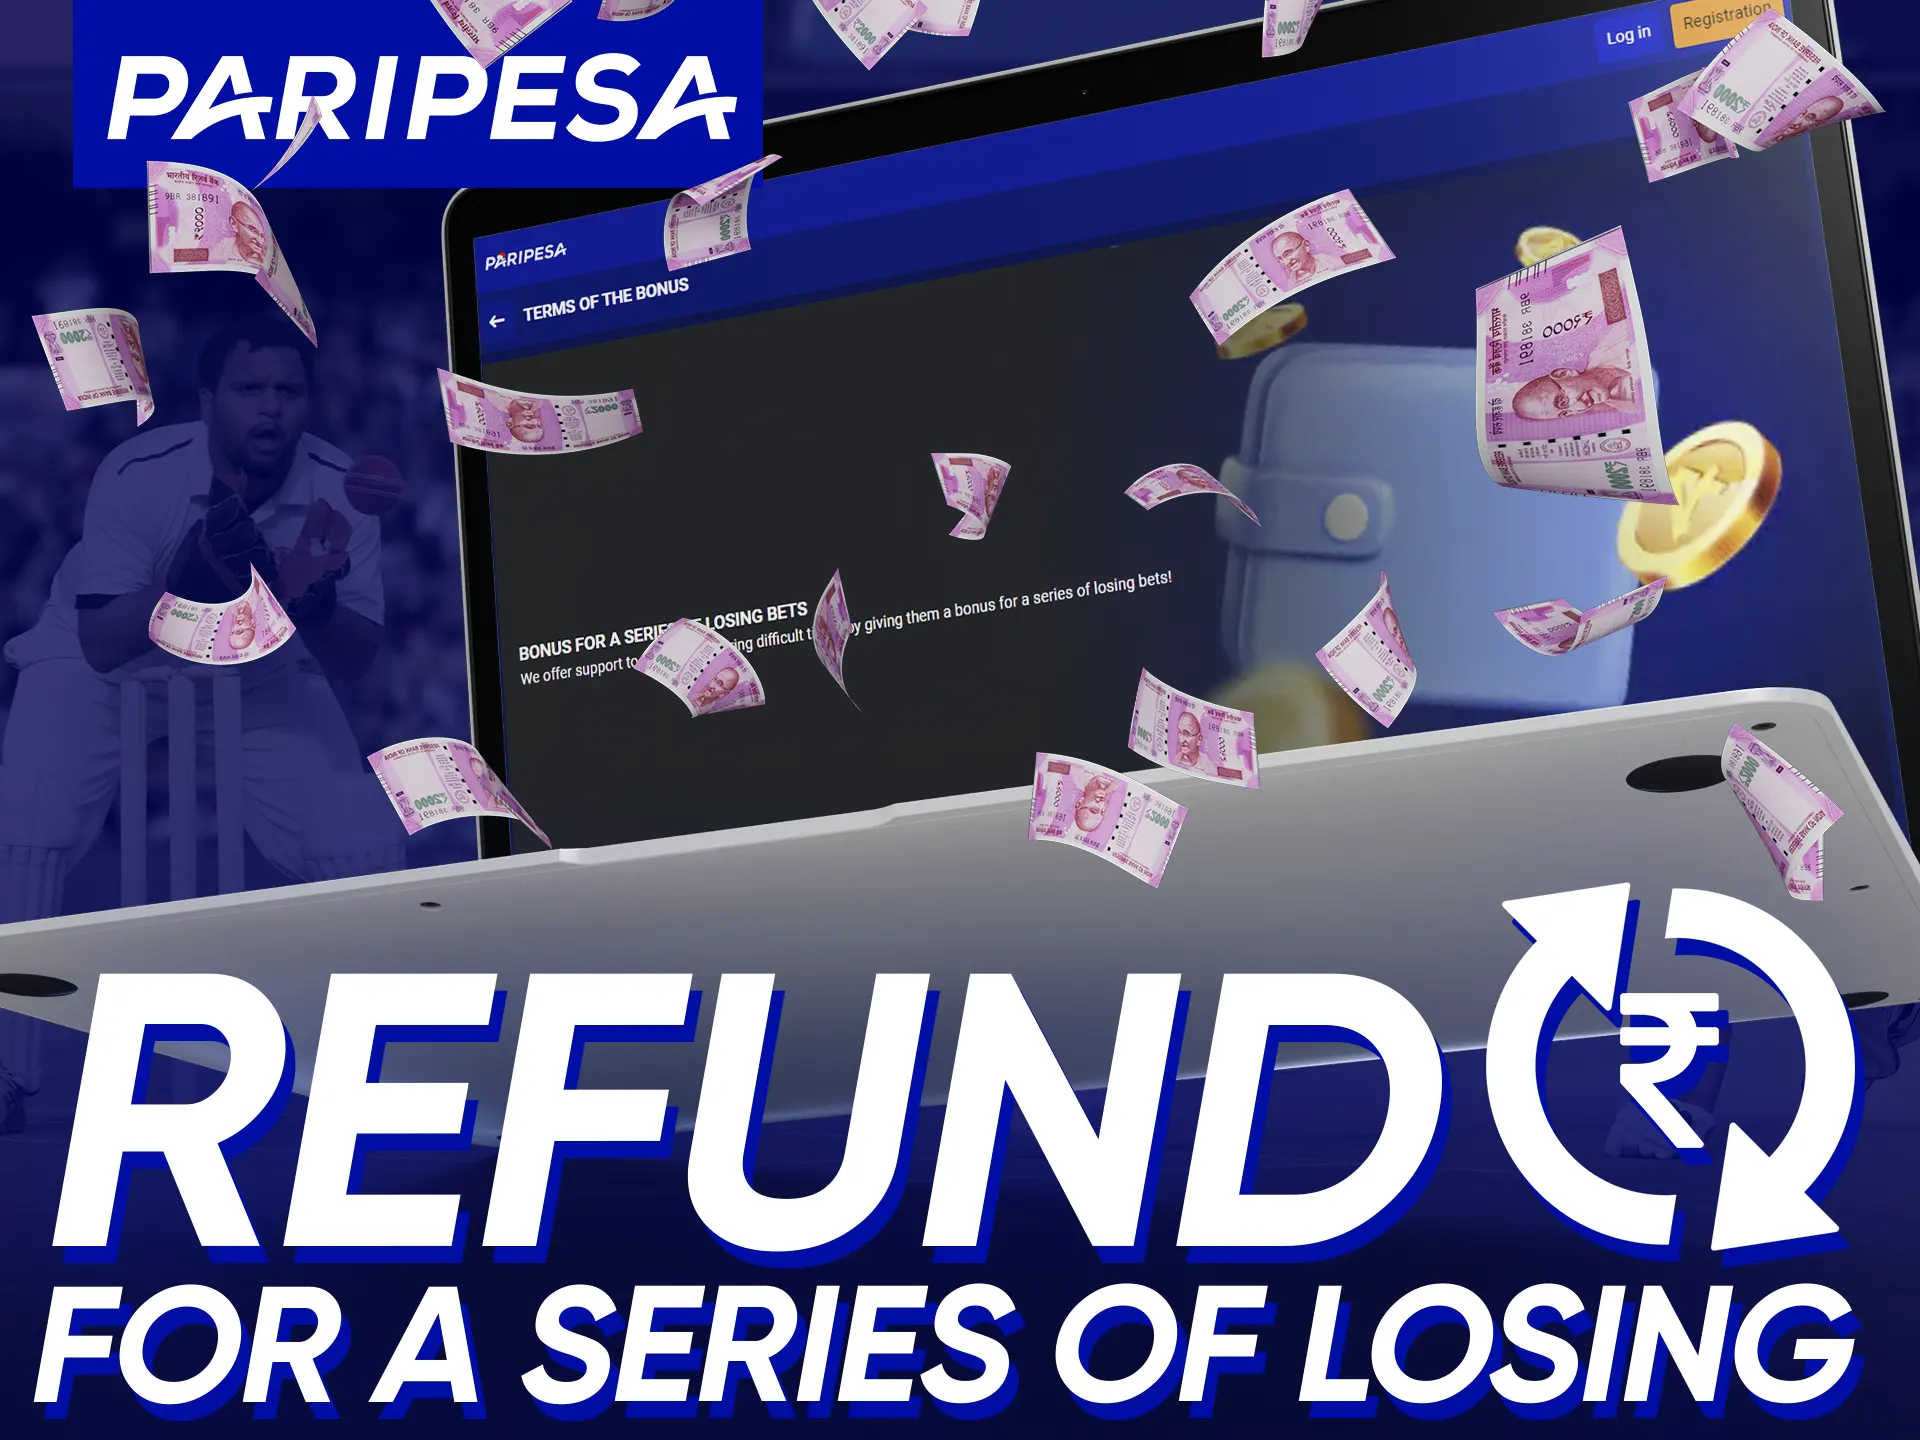 Get refund for 20 losing bets at Paripesa.